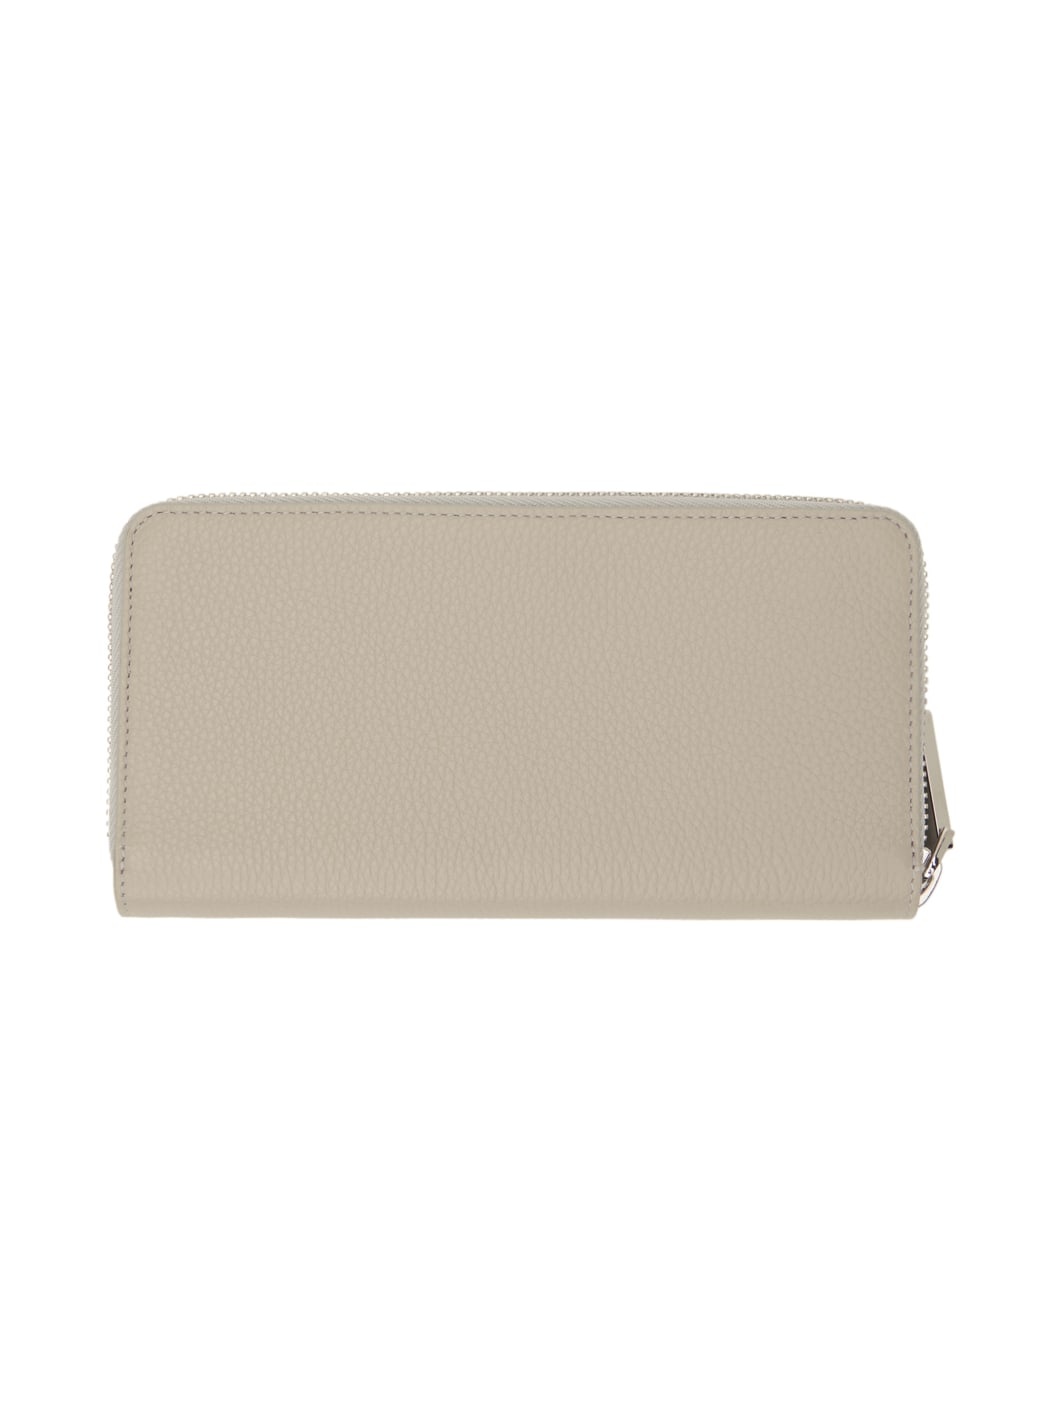 Gray Panettone Wallet - 4